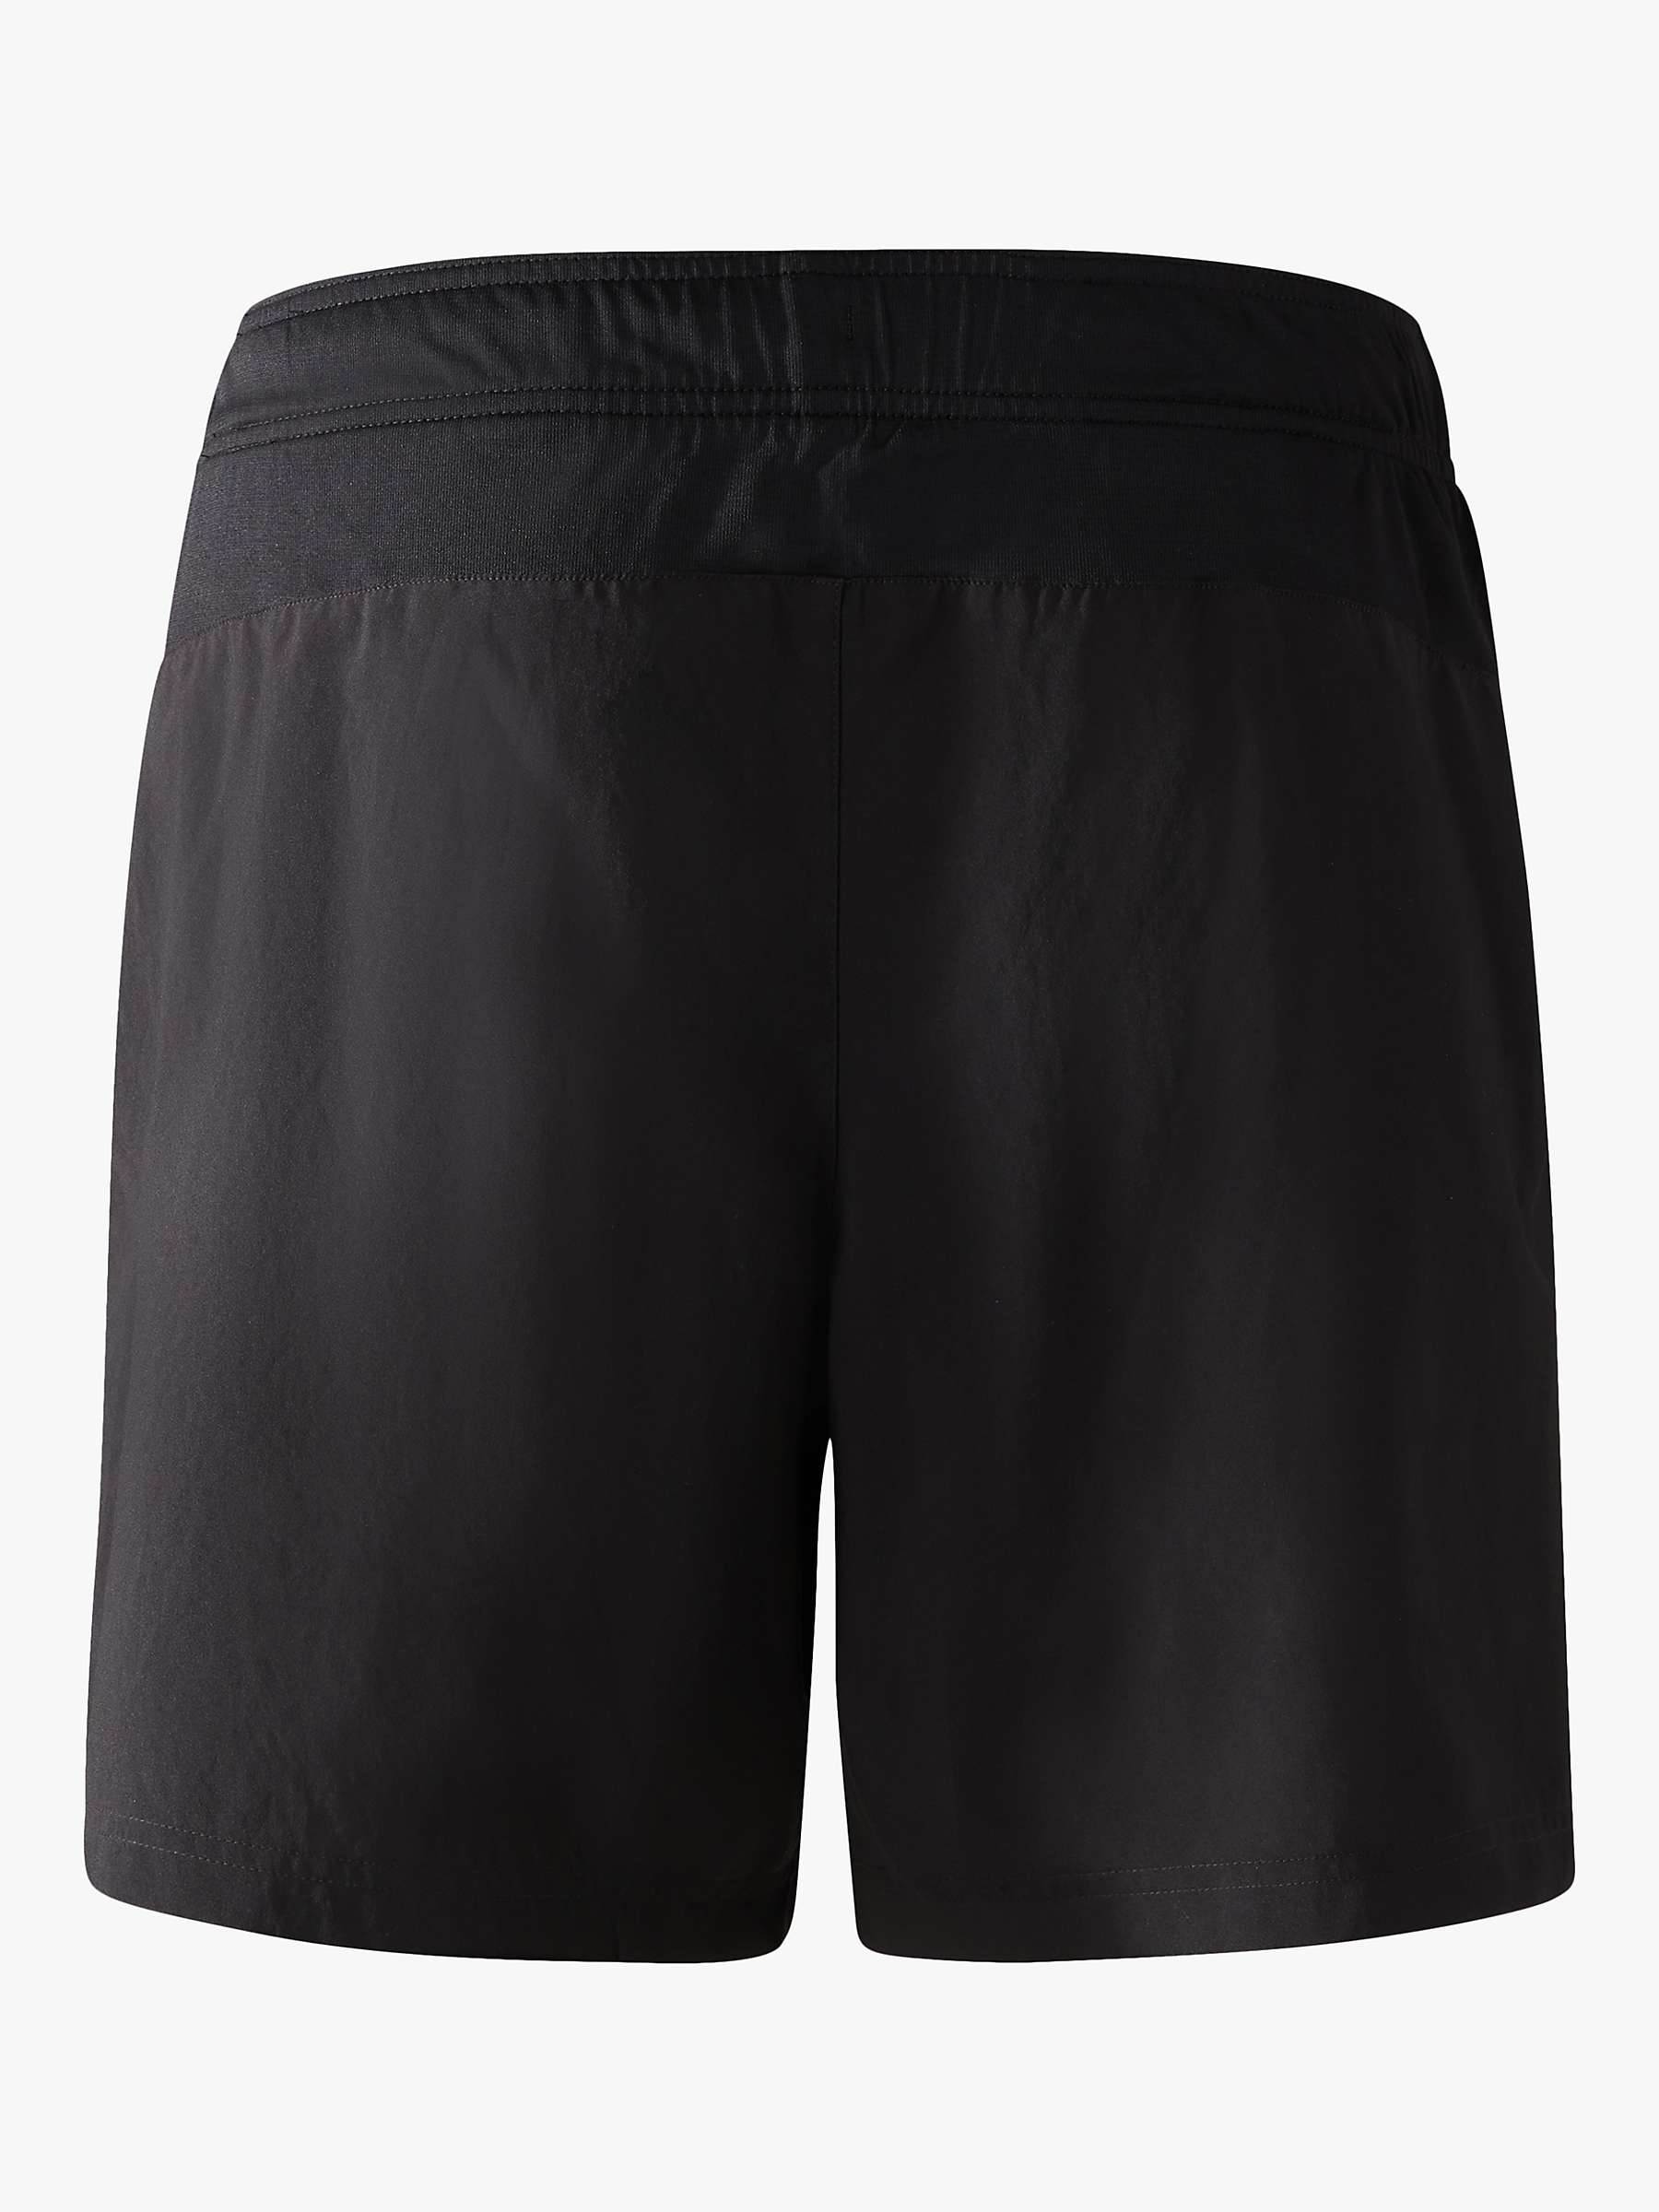 Buy The North Face 24/7 Shorts, TNF Black Online at johnlewis.com